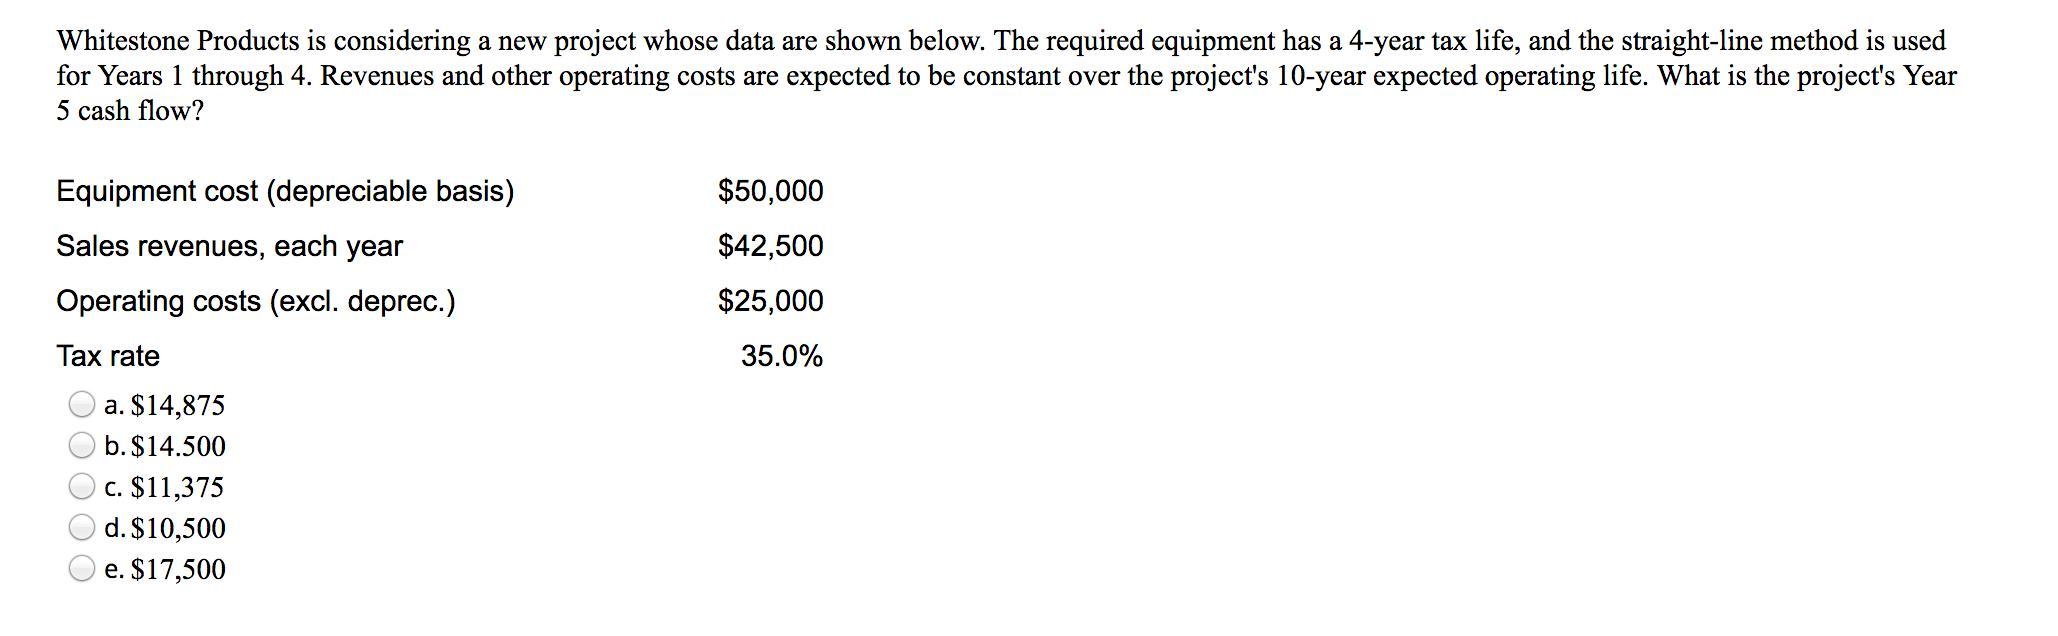 Whitestone Products is considering a new project whose data are shown below. The required equipment has a 4-year tax life, an